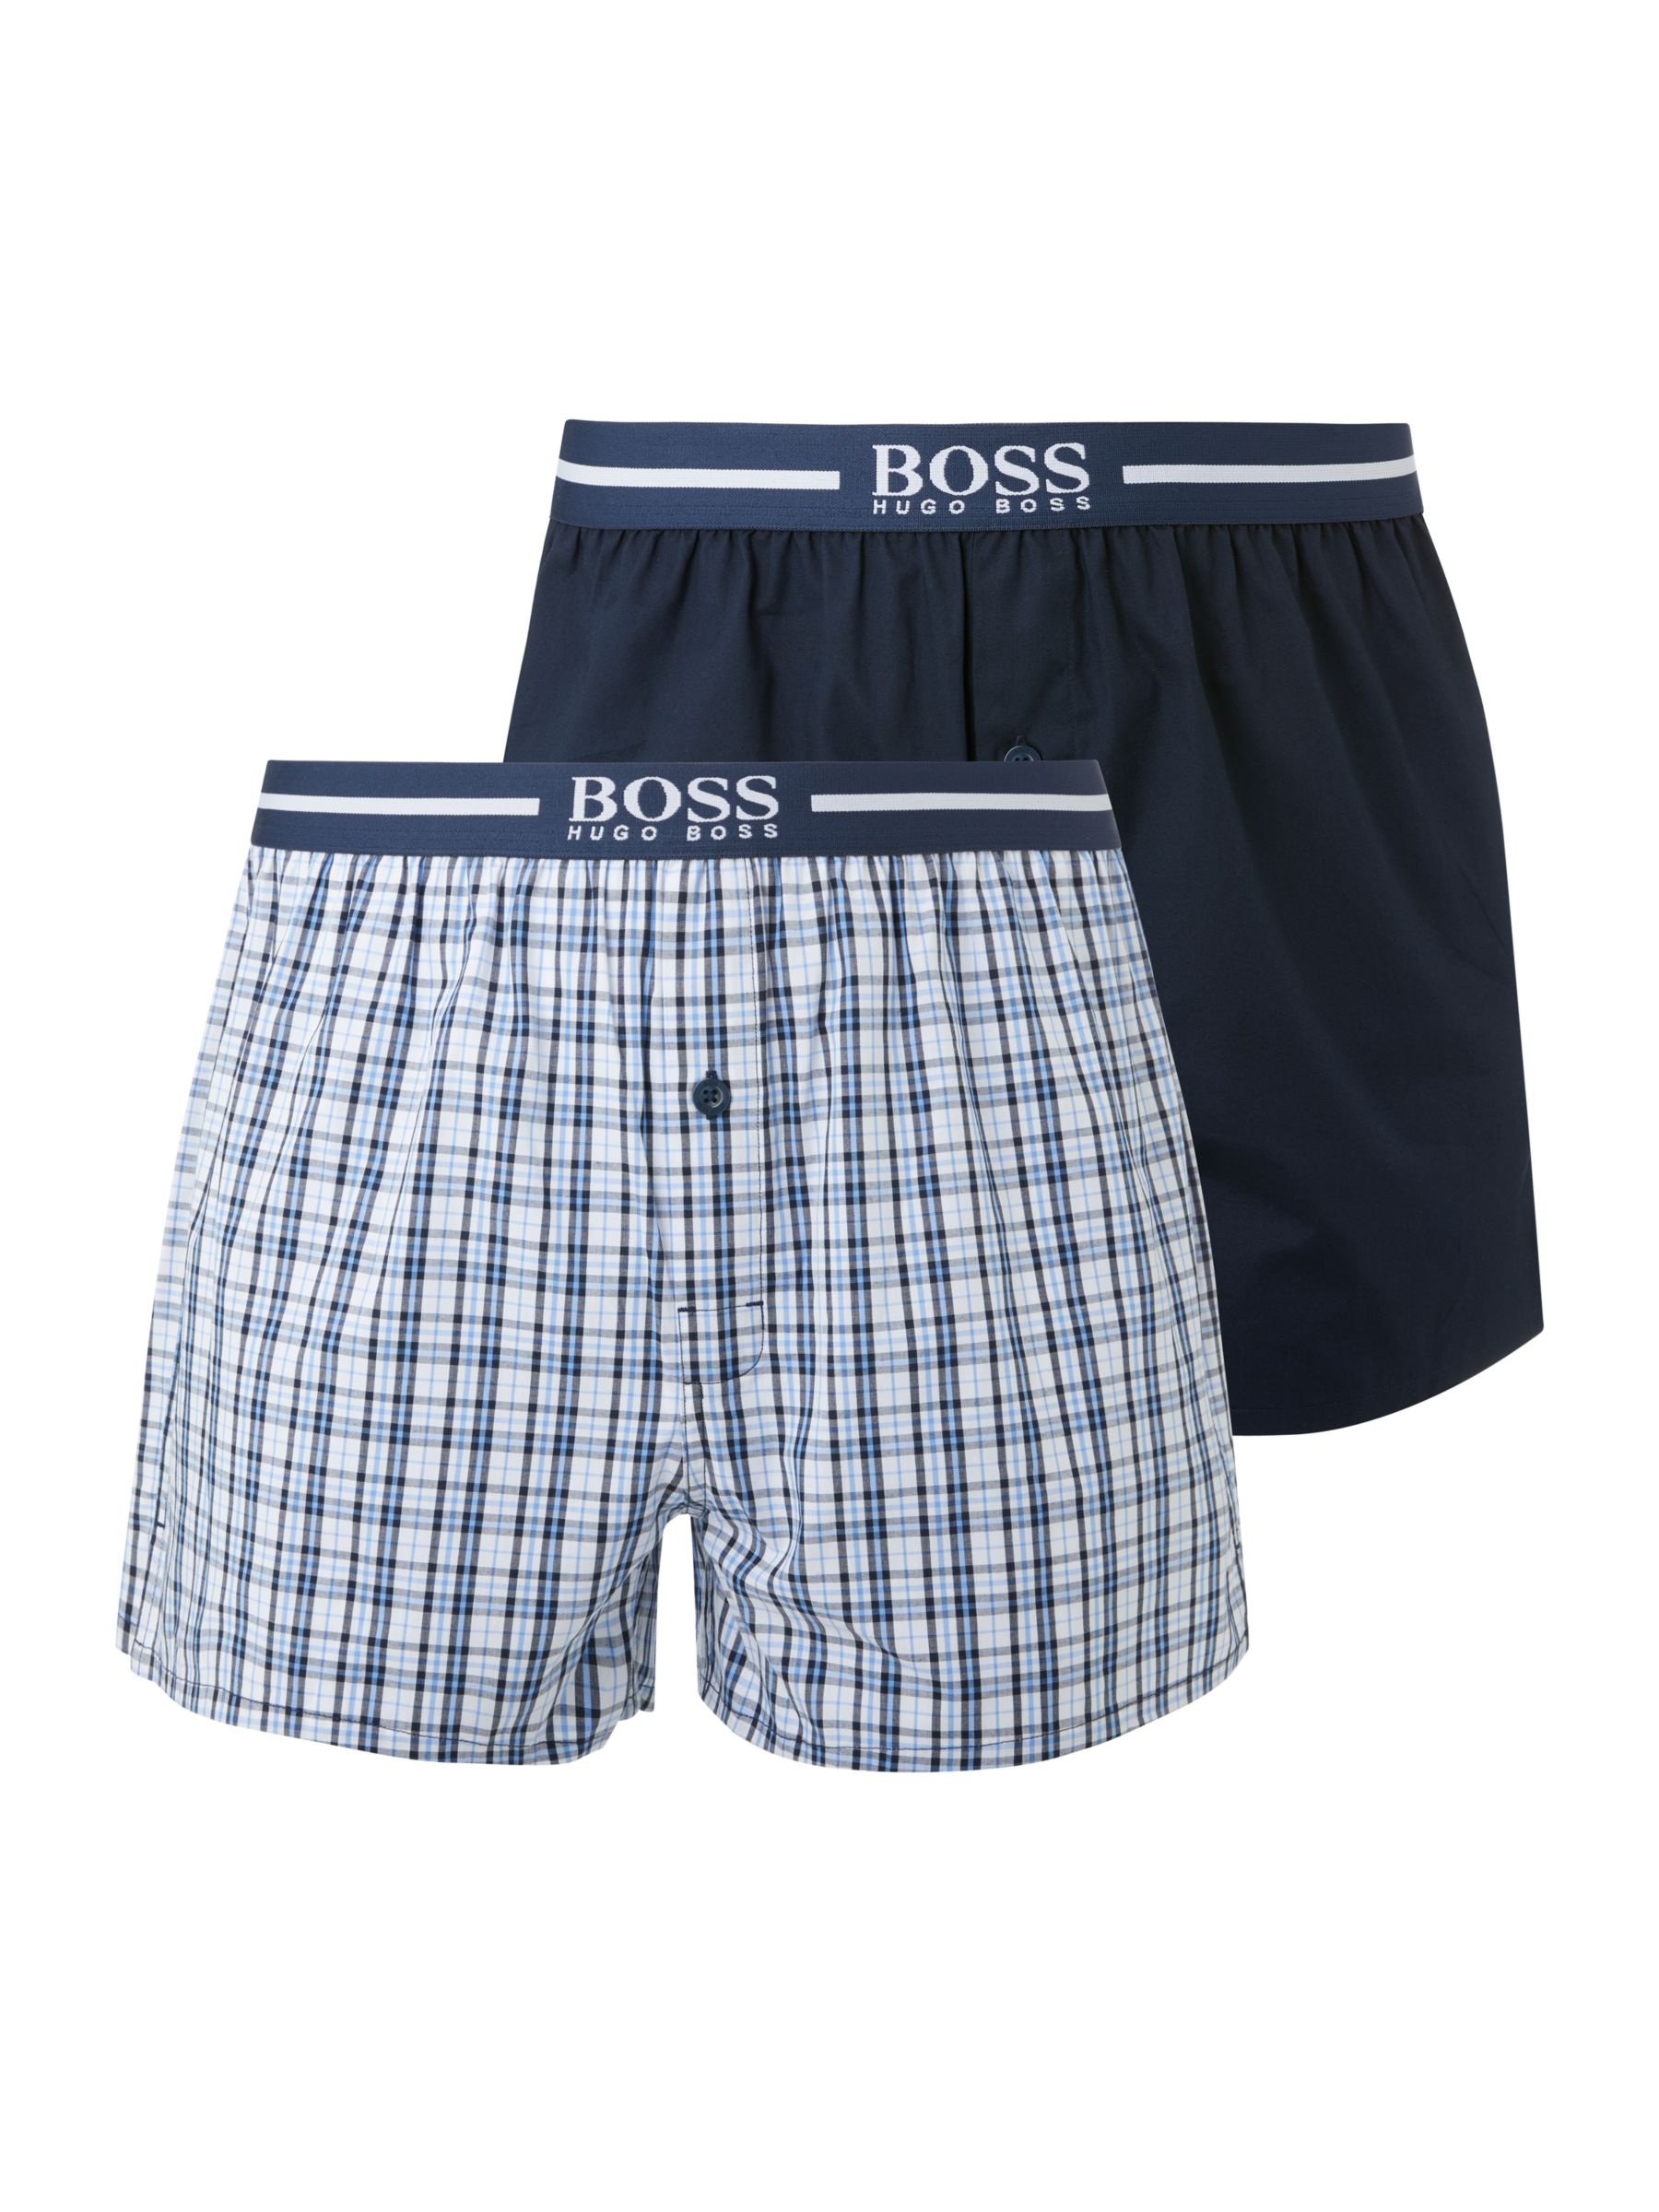 BOSS Check Cotton Boxers, Pack of 2, Blue